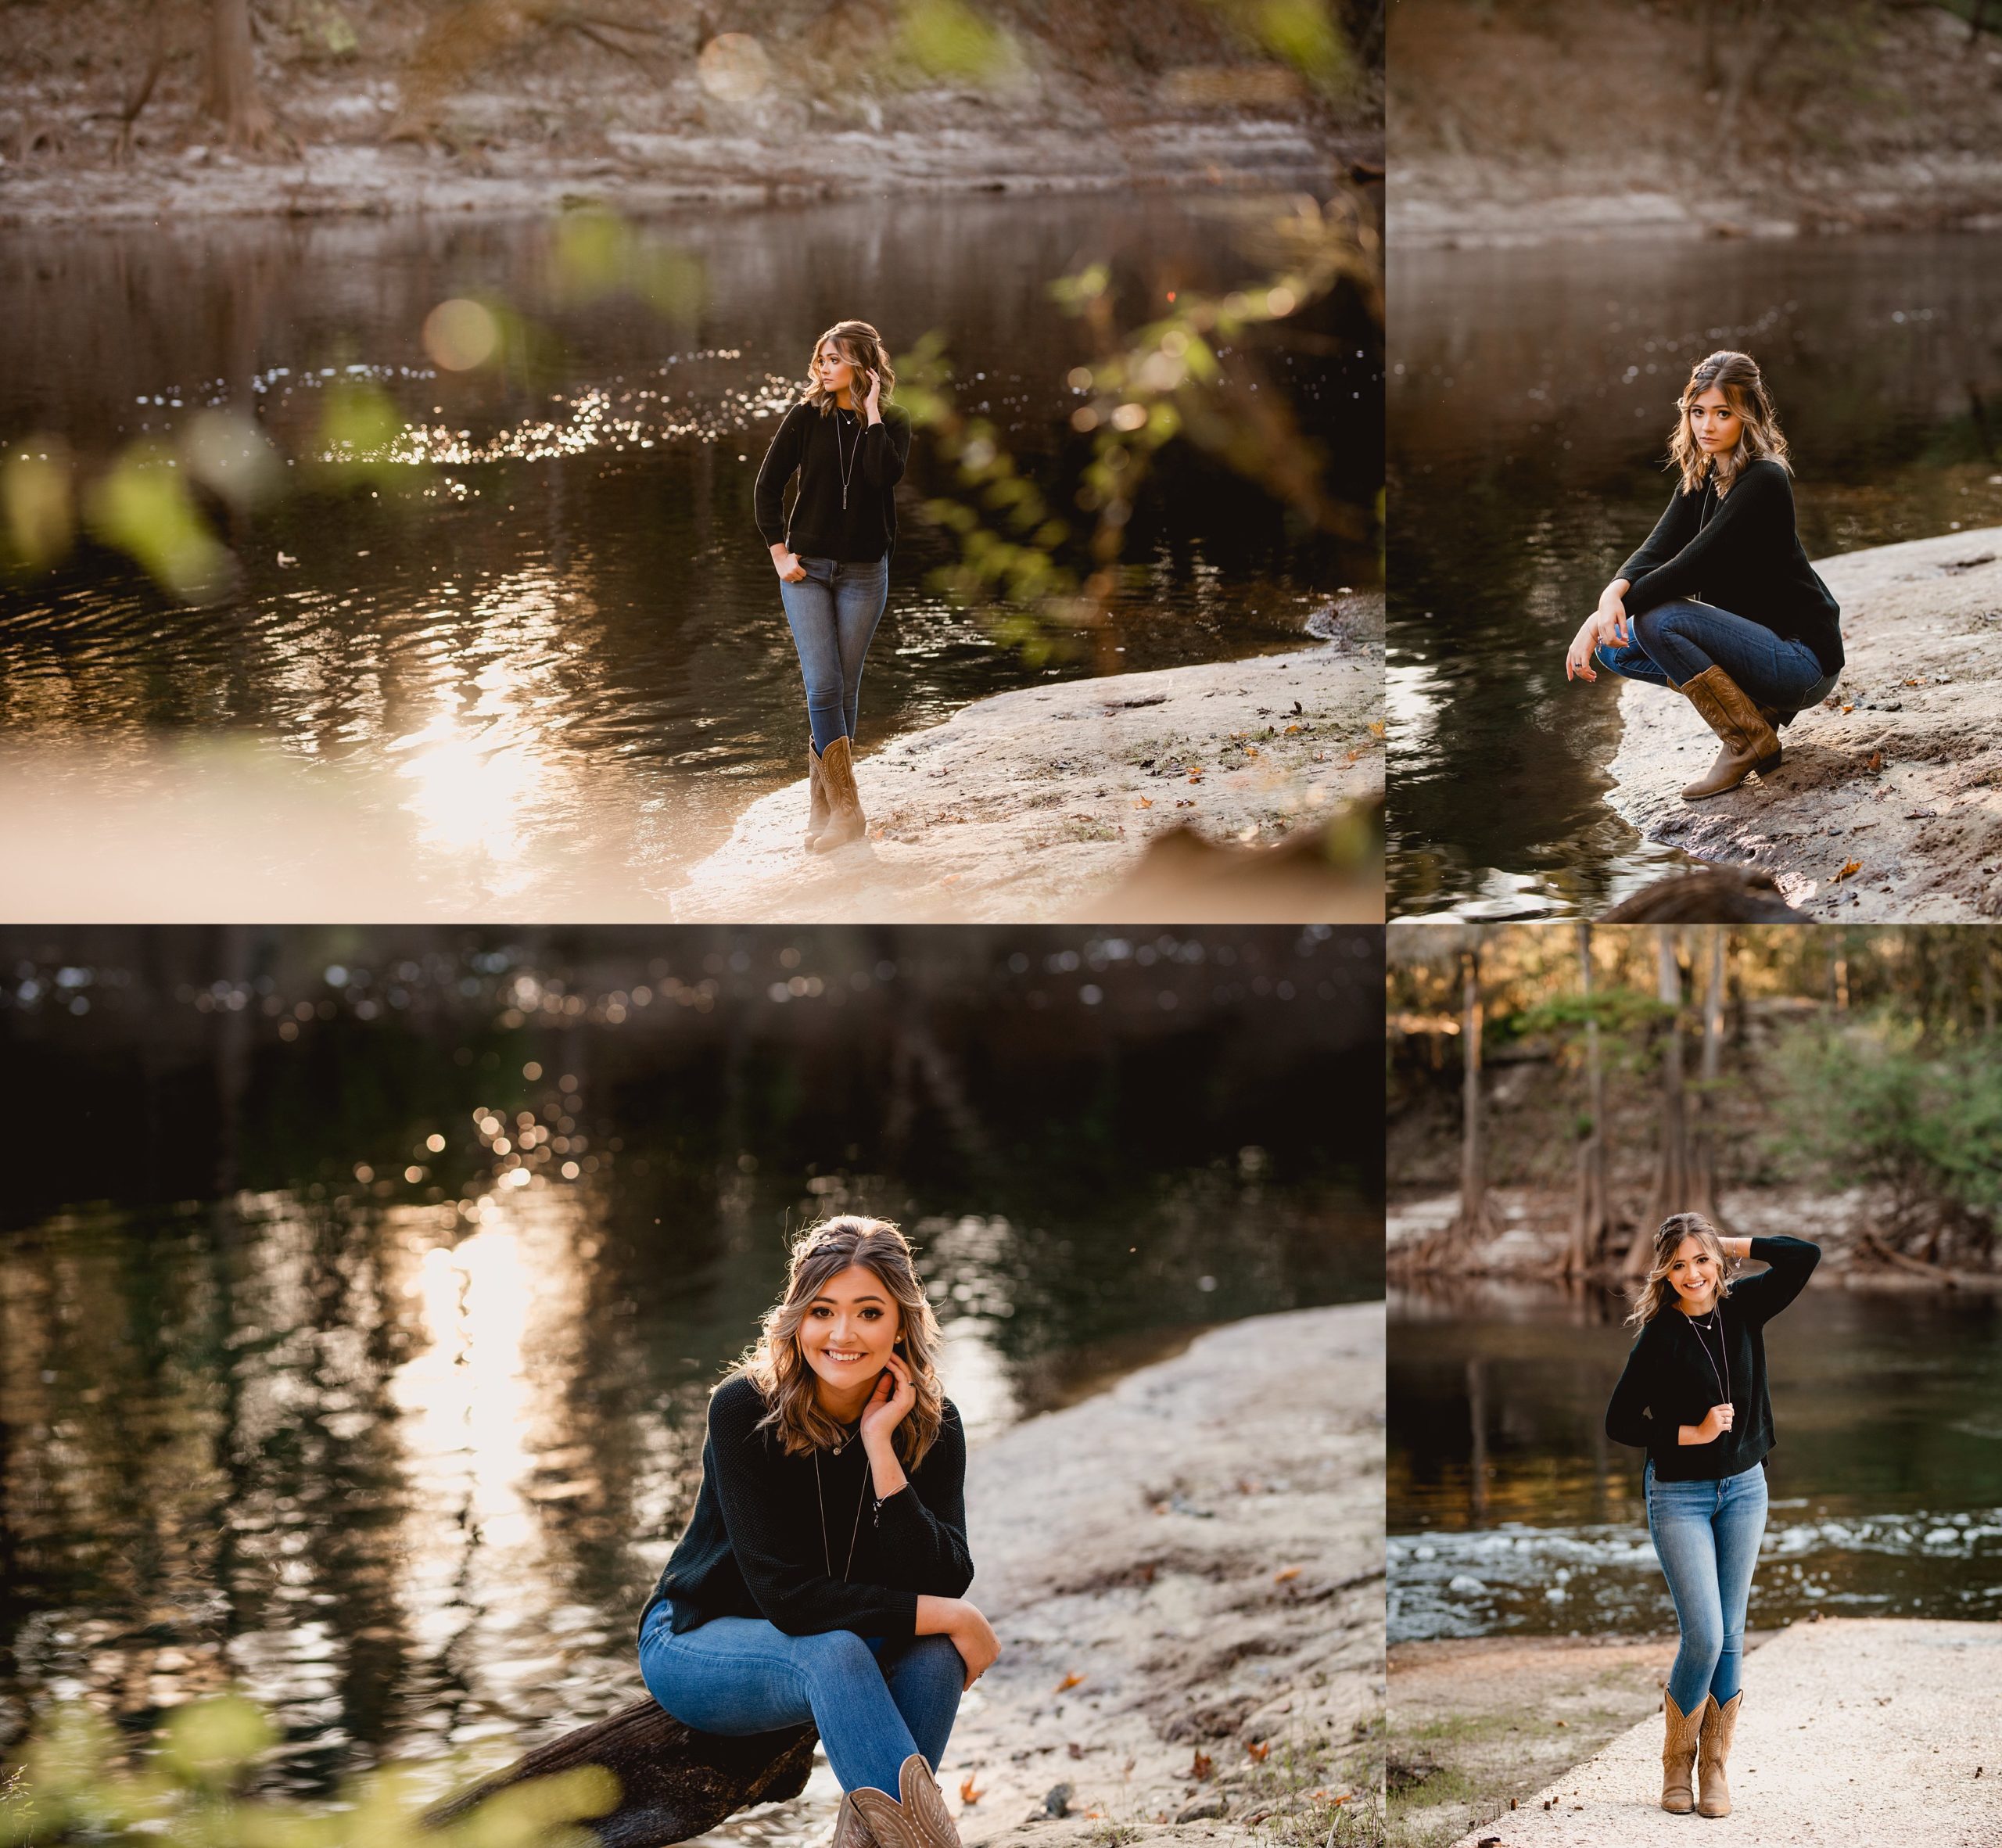 Senior pictures along the Suwannee River in High Springs, FL.